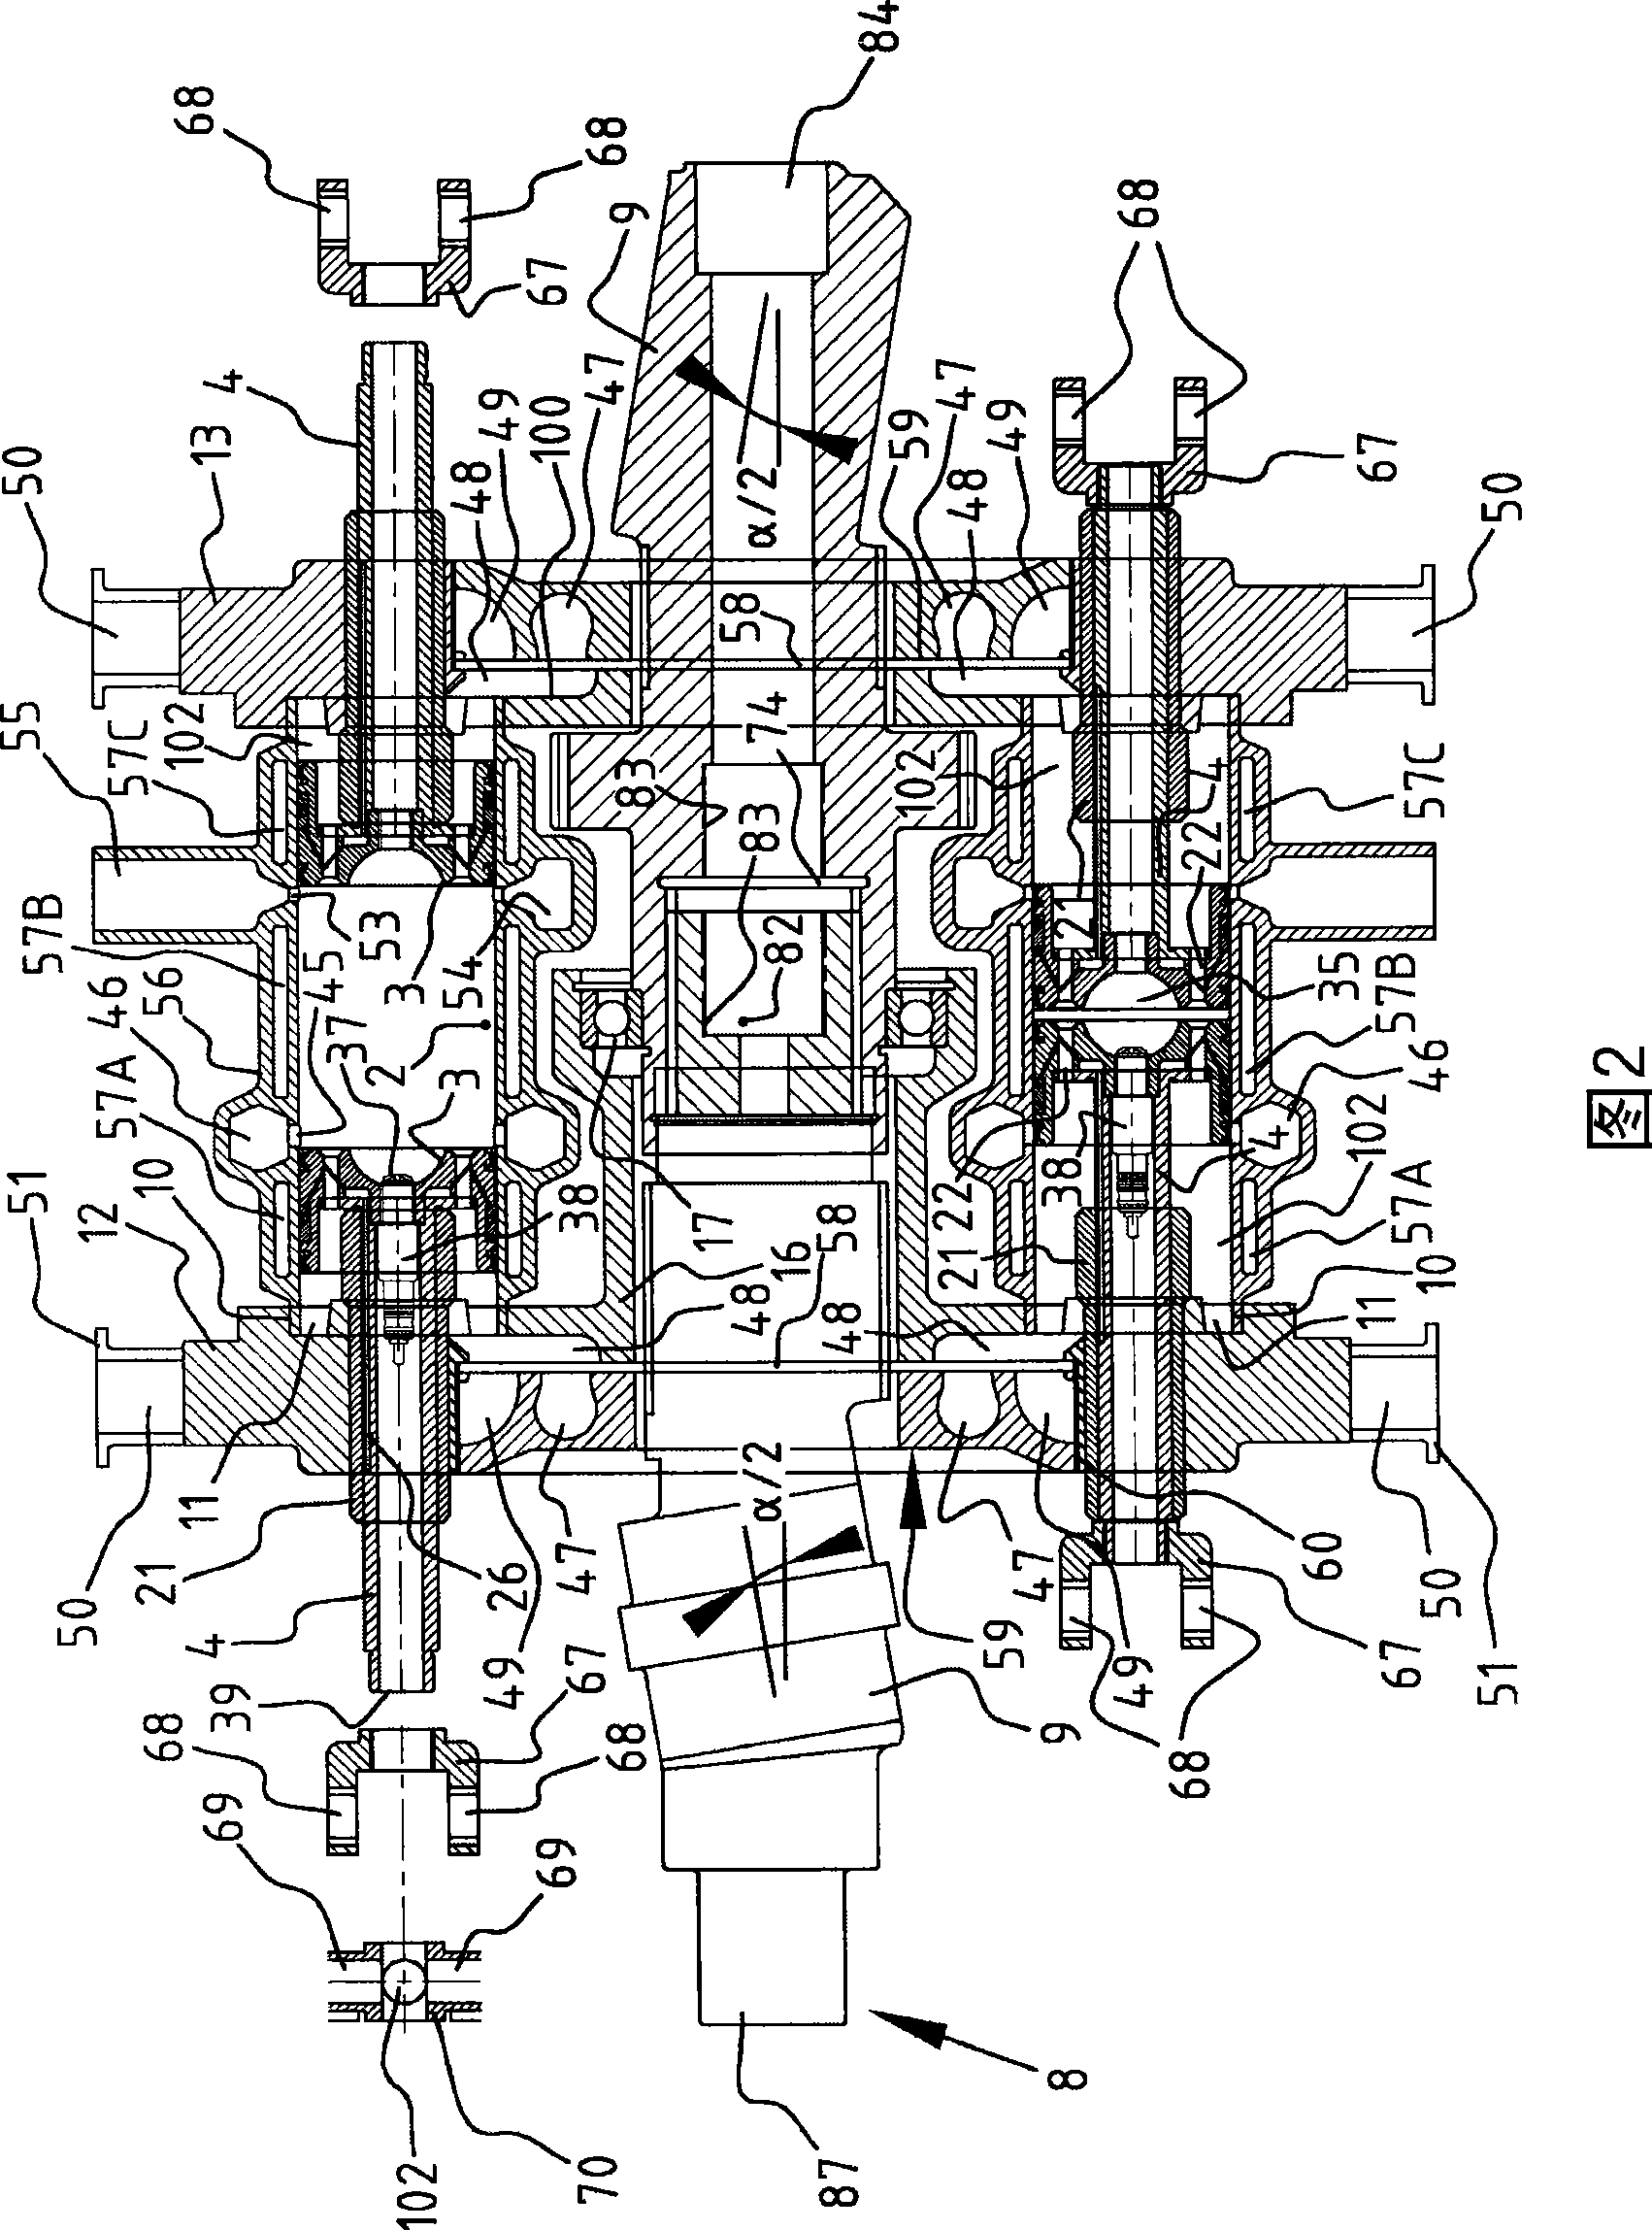 Internal combustion engine with variable compression ratio